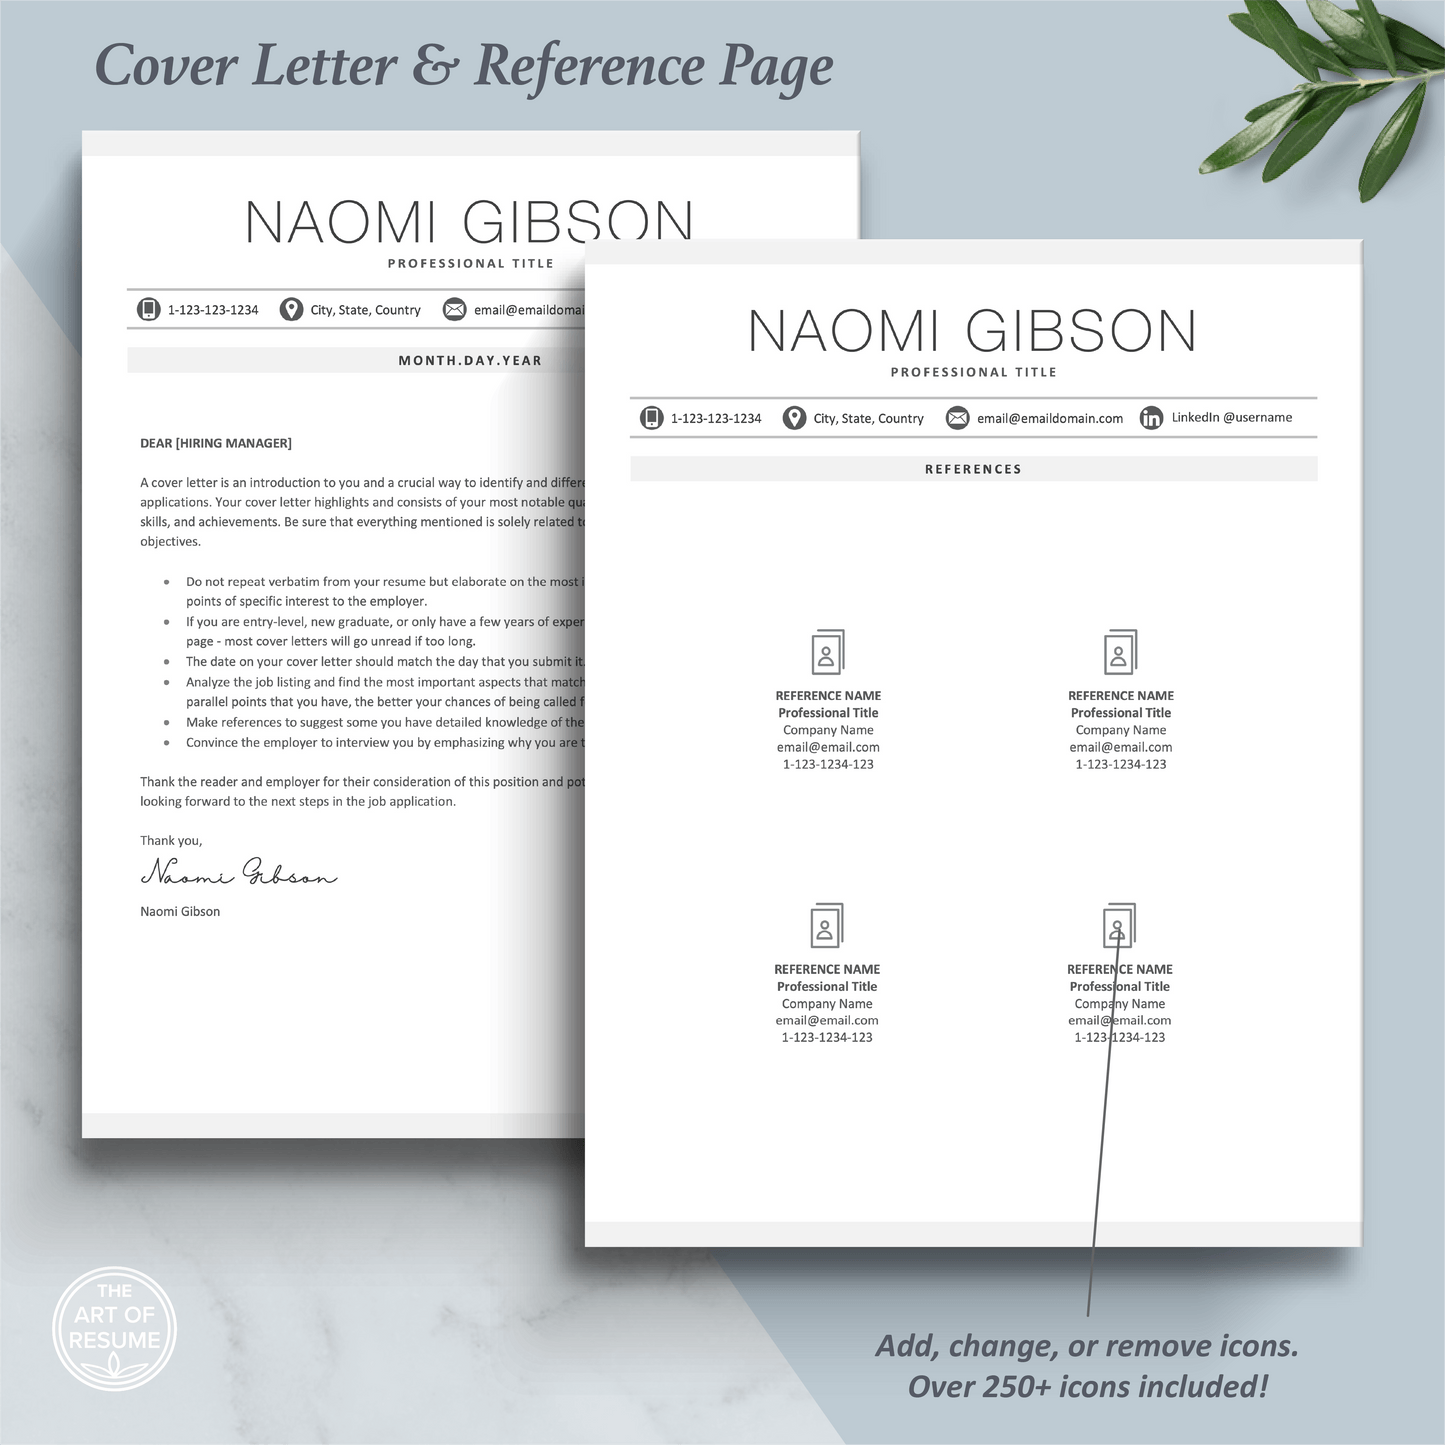 The Art of Resume Templates |  Professional Minimalist Simple Letter and Reference Page Design Templates Instant Download